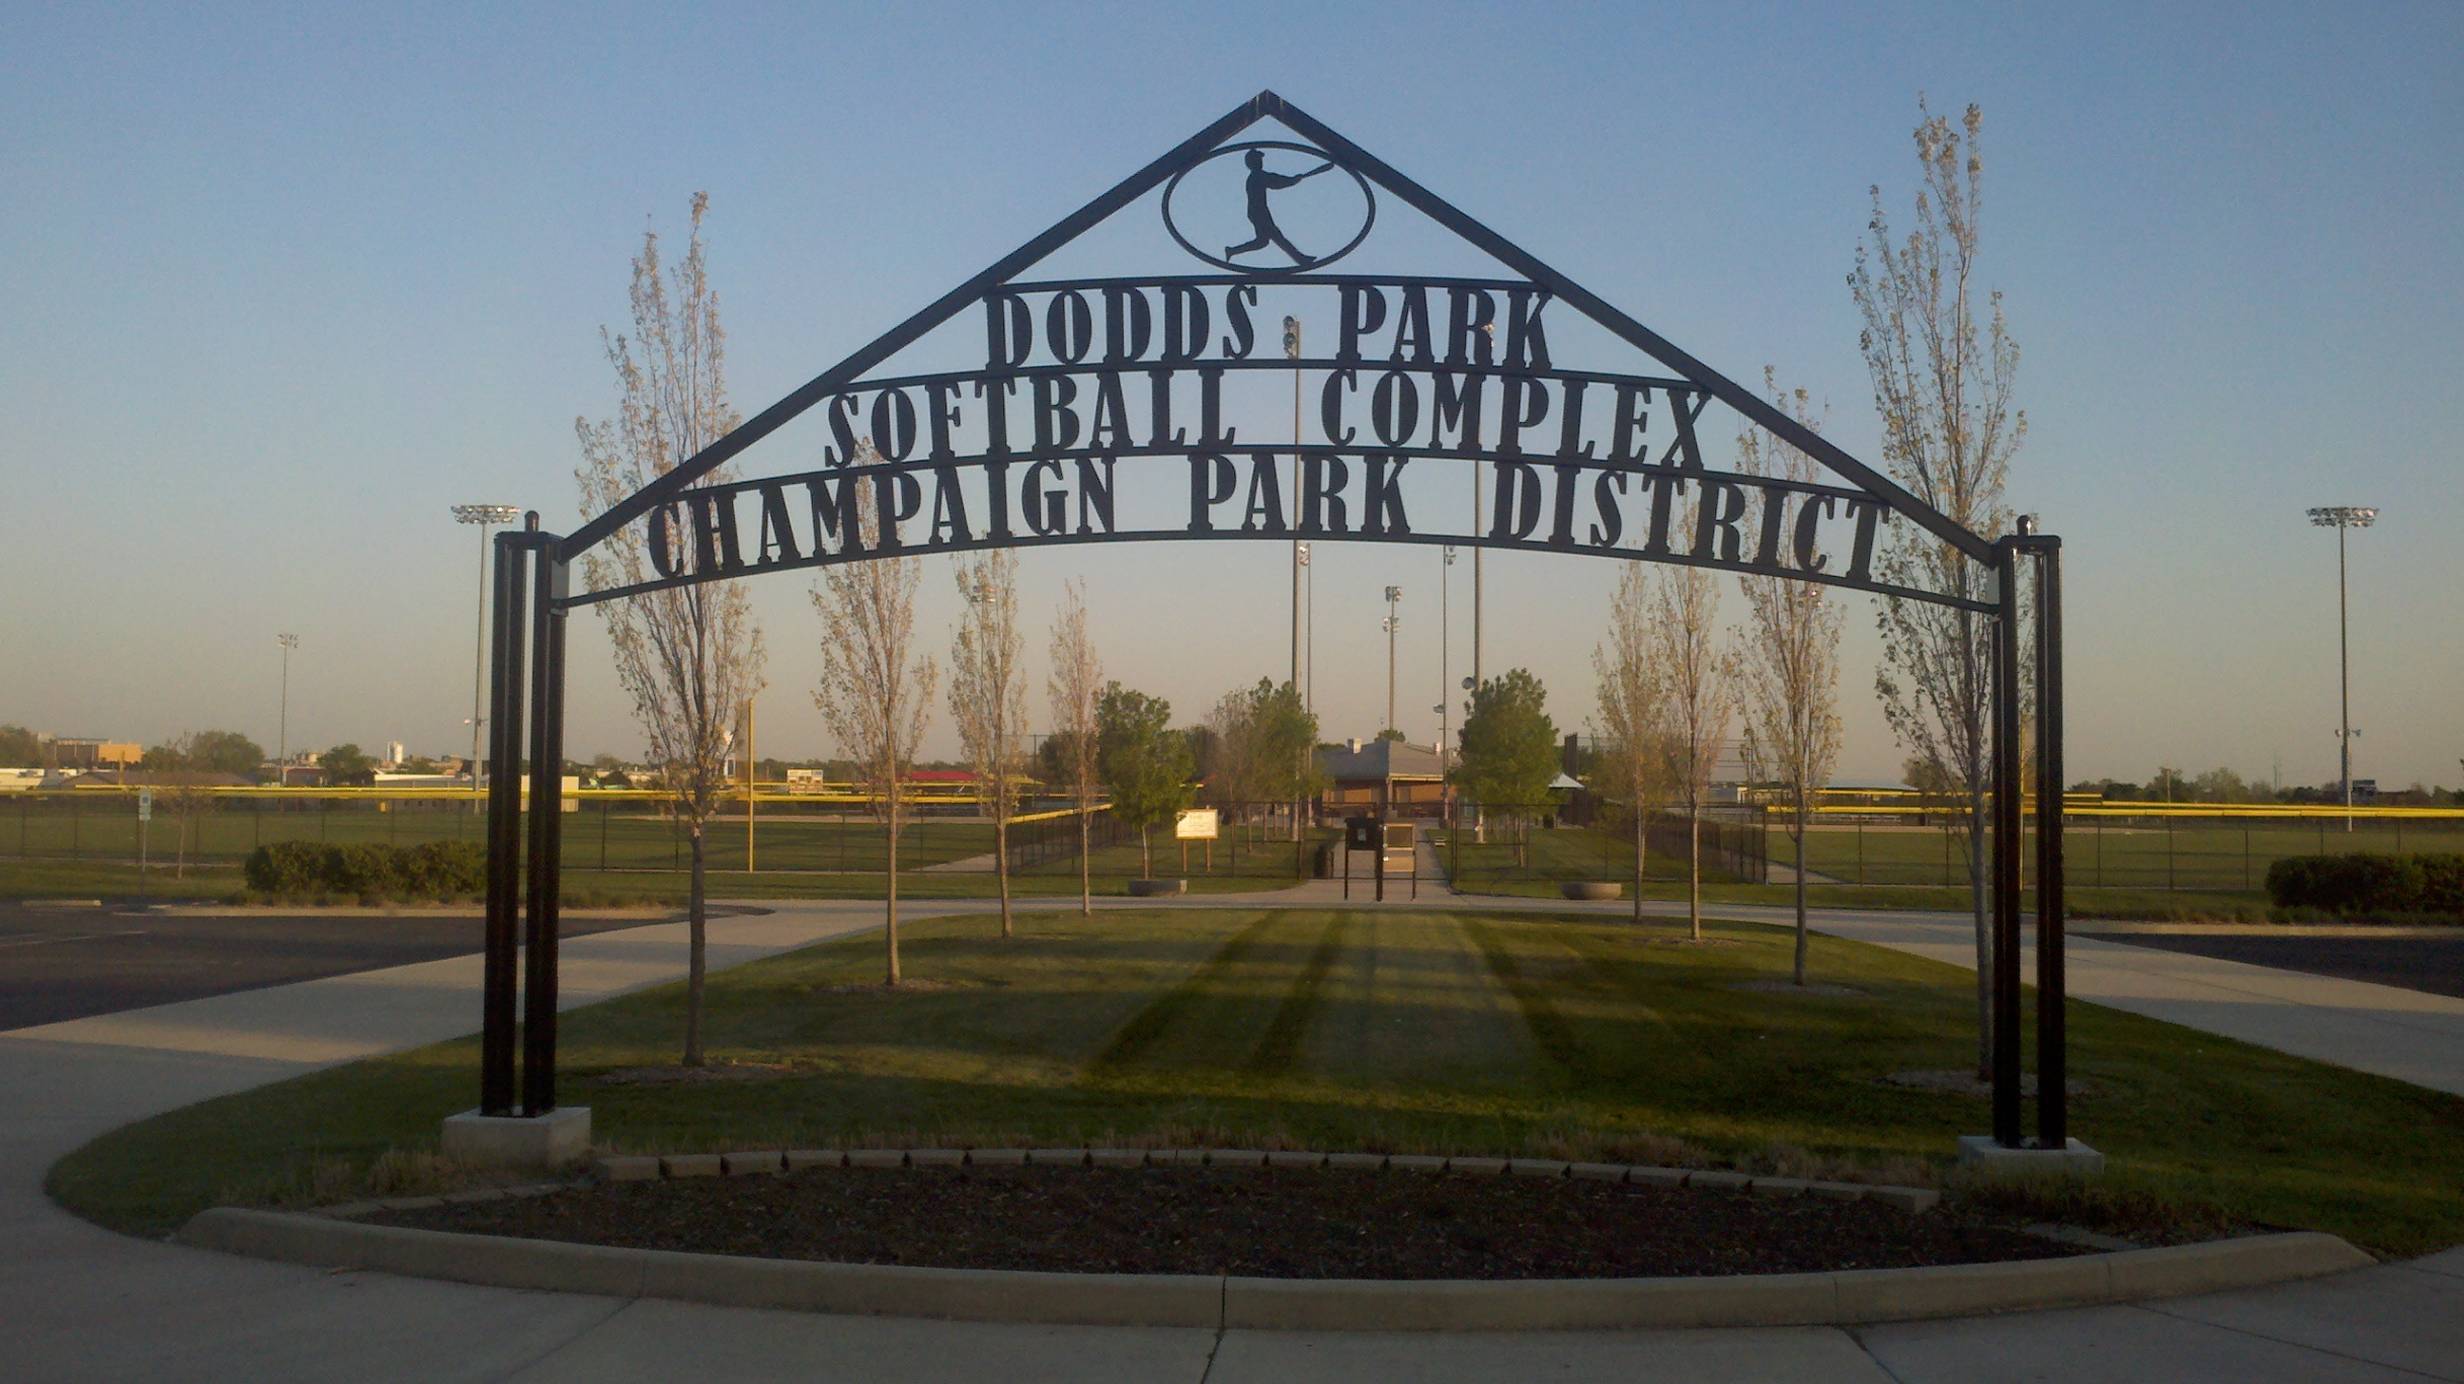 10 key takeaways from the Park Board meeting on Dodds Park